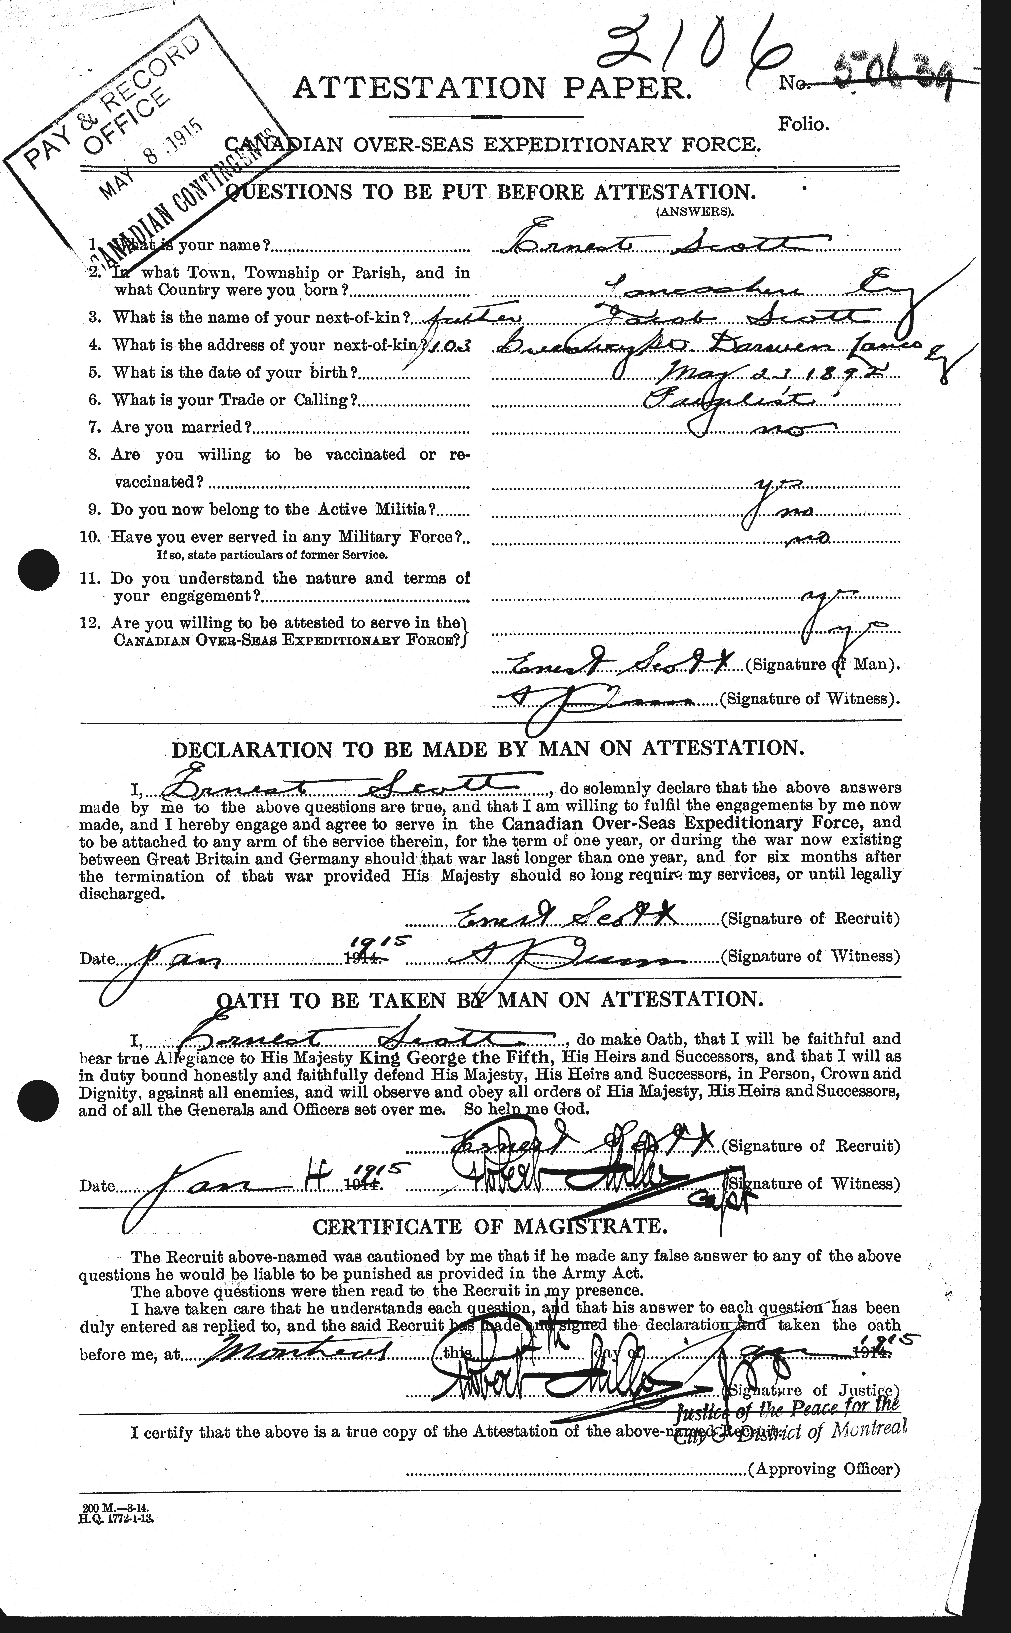 Personnel Records of the First World War - CEF 085016a